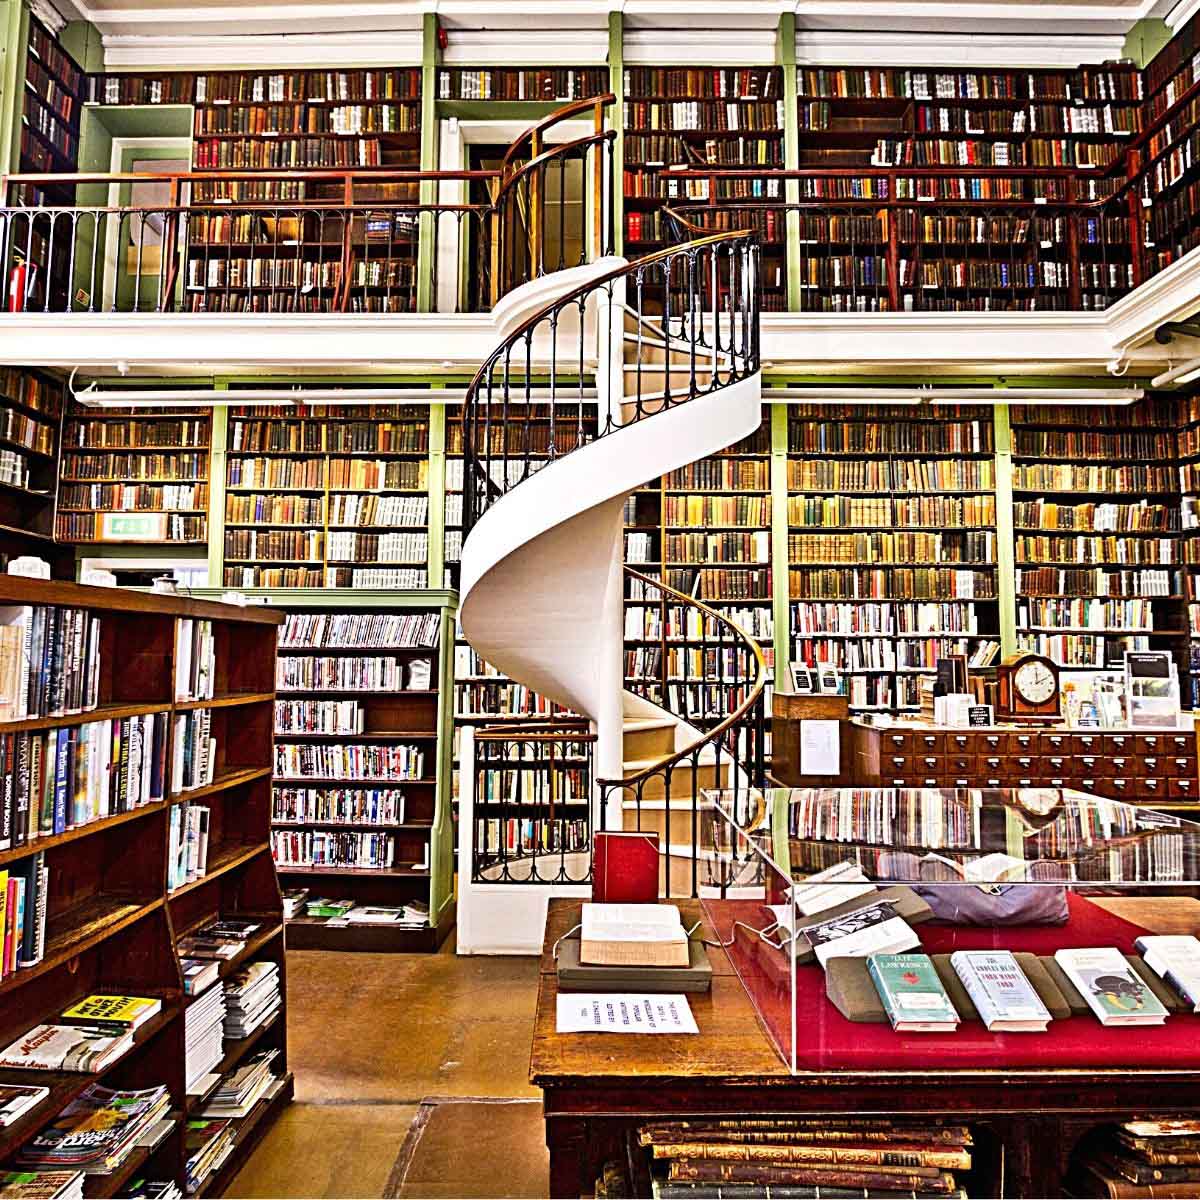 A large library filled with shelves of books, and a two-story spiral staircase in the middle of the room.